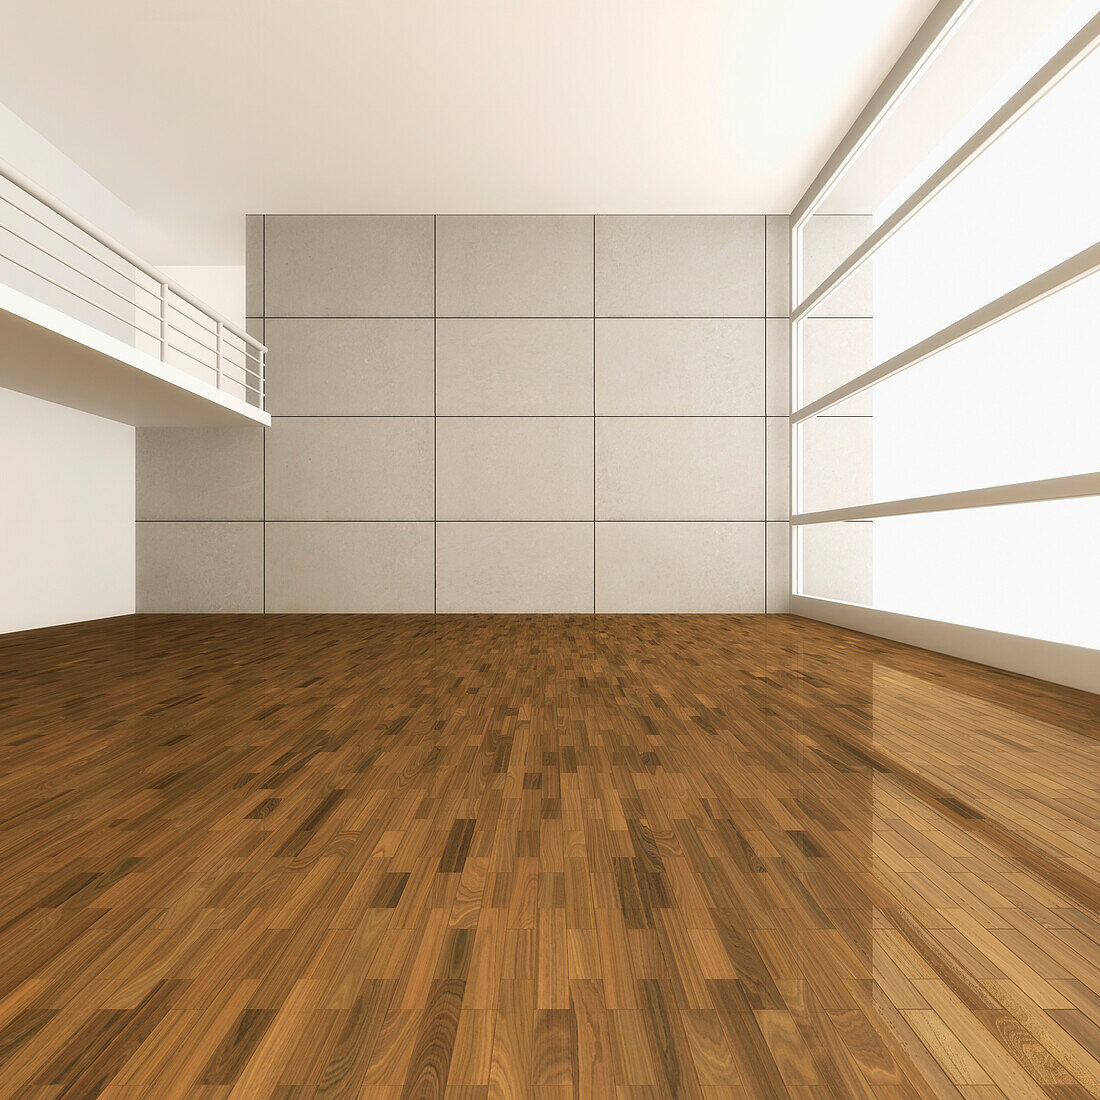 3D-Illustration of Empty Room with Gallery